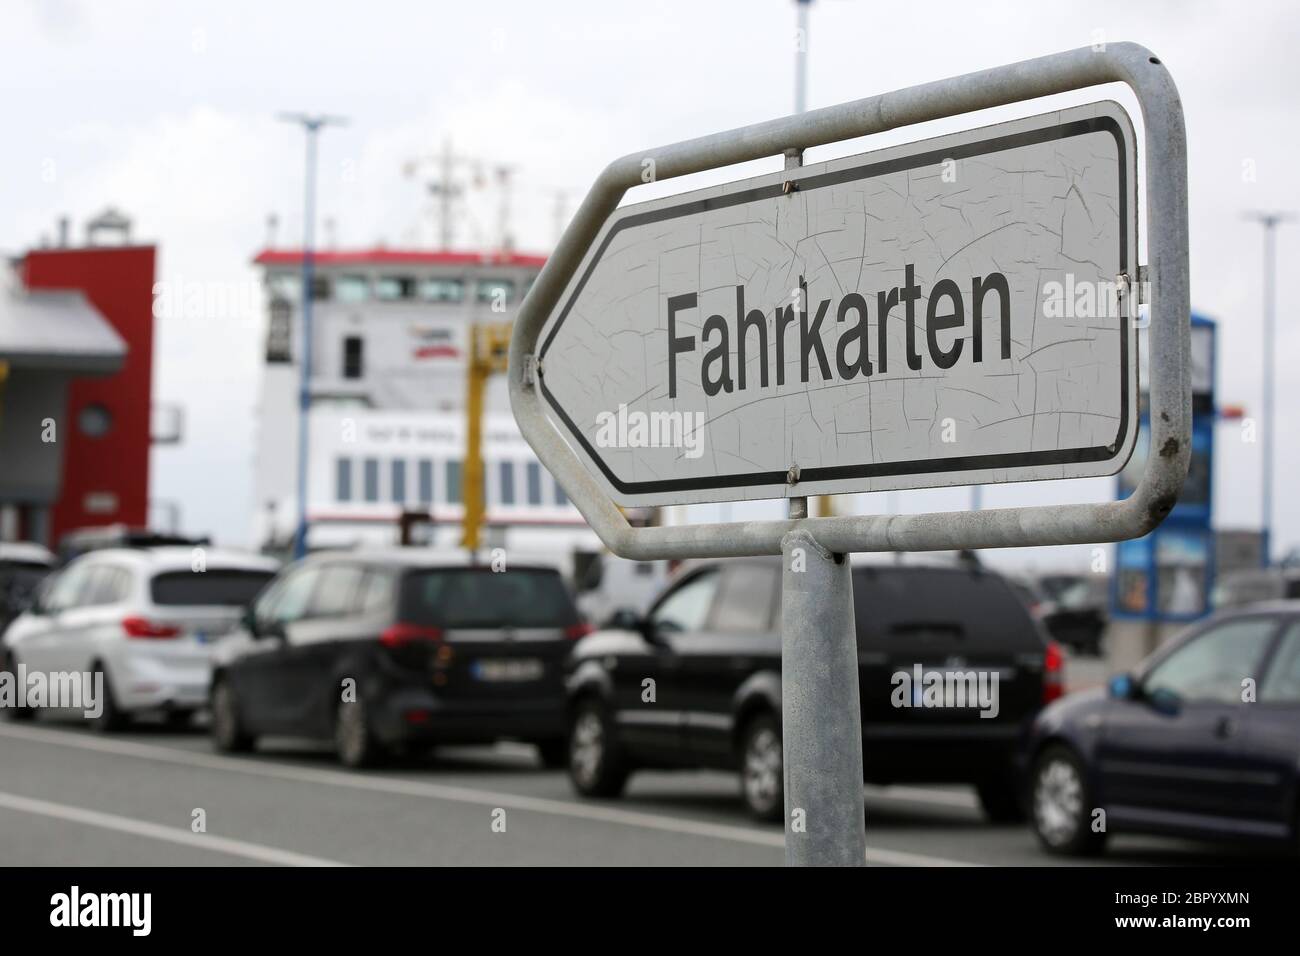 17 May 2020, Schleswig-Holstein, Dagebüll: A sign with the inscription 'Fahrkarten' (tickets) is in the harbour of Dagebüll, in the background vehicles are queuing in front of a ferry. In Schleswig-Holstein, loosening of the rules came into force on 18 May 2020 during the Corona crisis. Ferries brought tourists back to the islands of Föhr, Sylt or Amrum. Photo: Bodo Marks/dpa/Bodo Marks Stock Photo